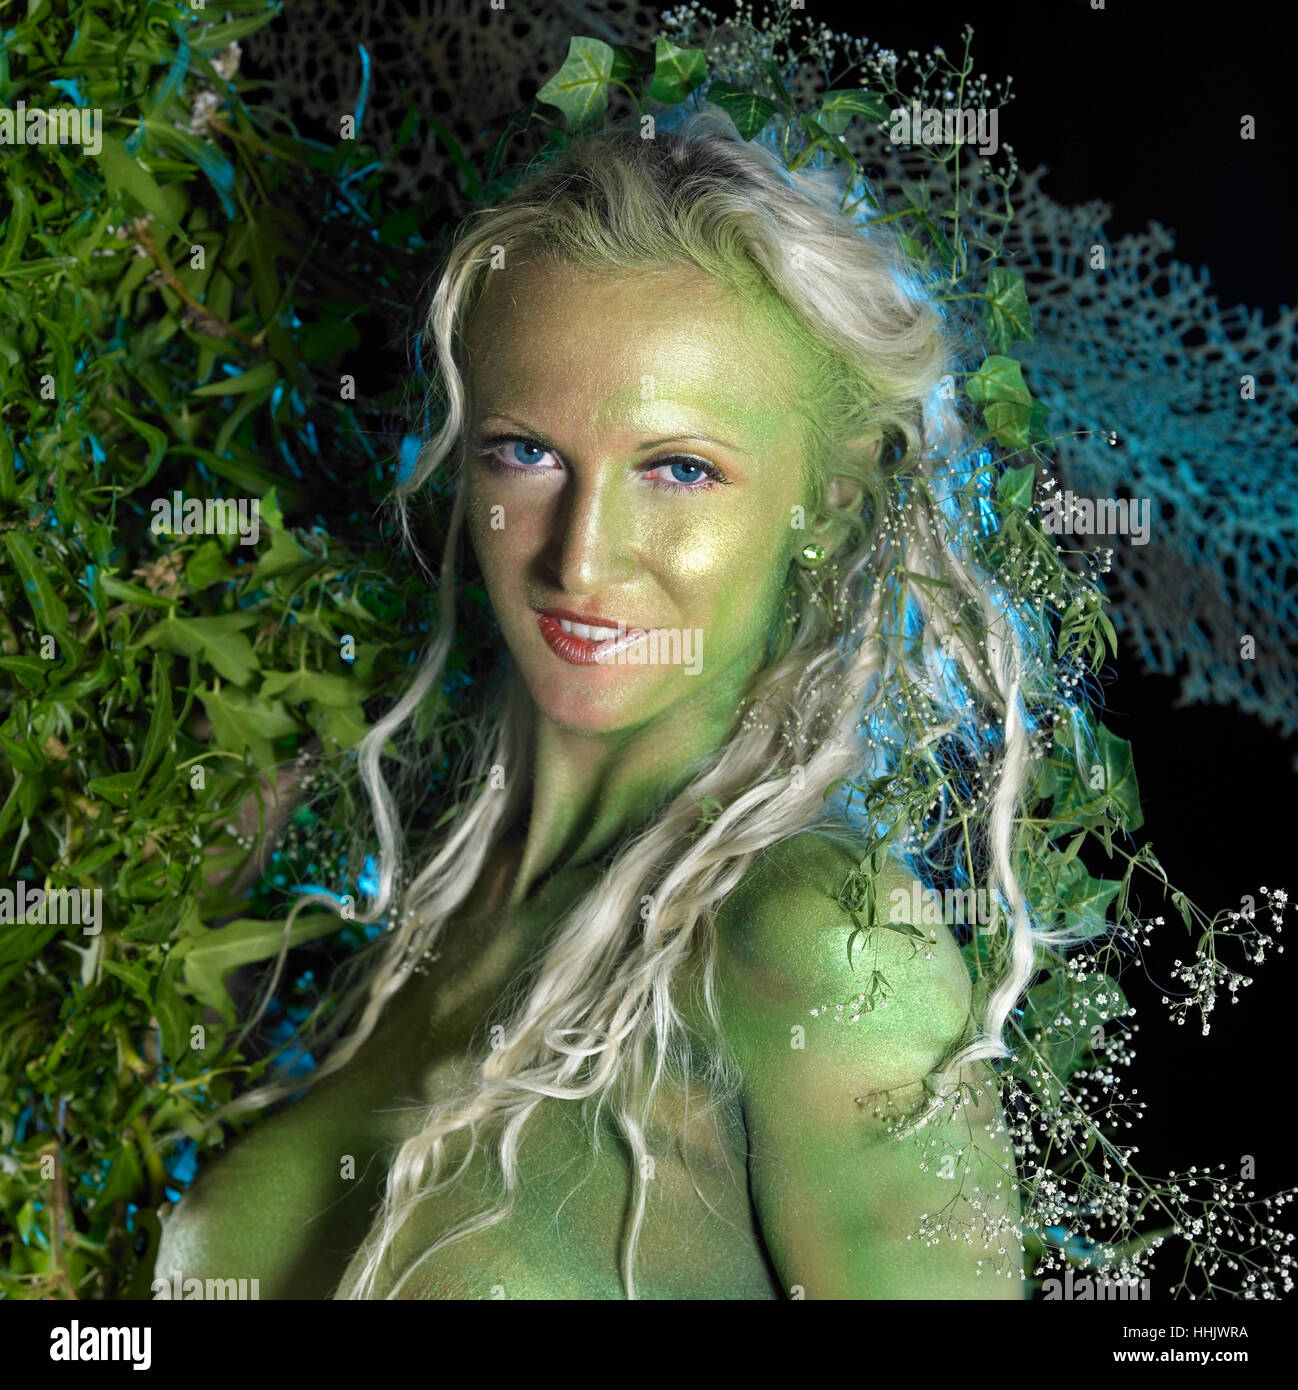 bodypainted woman in front of dark back, partly hidden by green vegetation Stock Photo